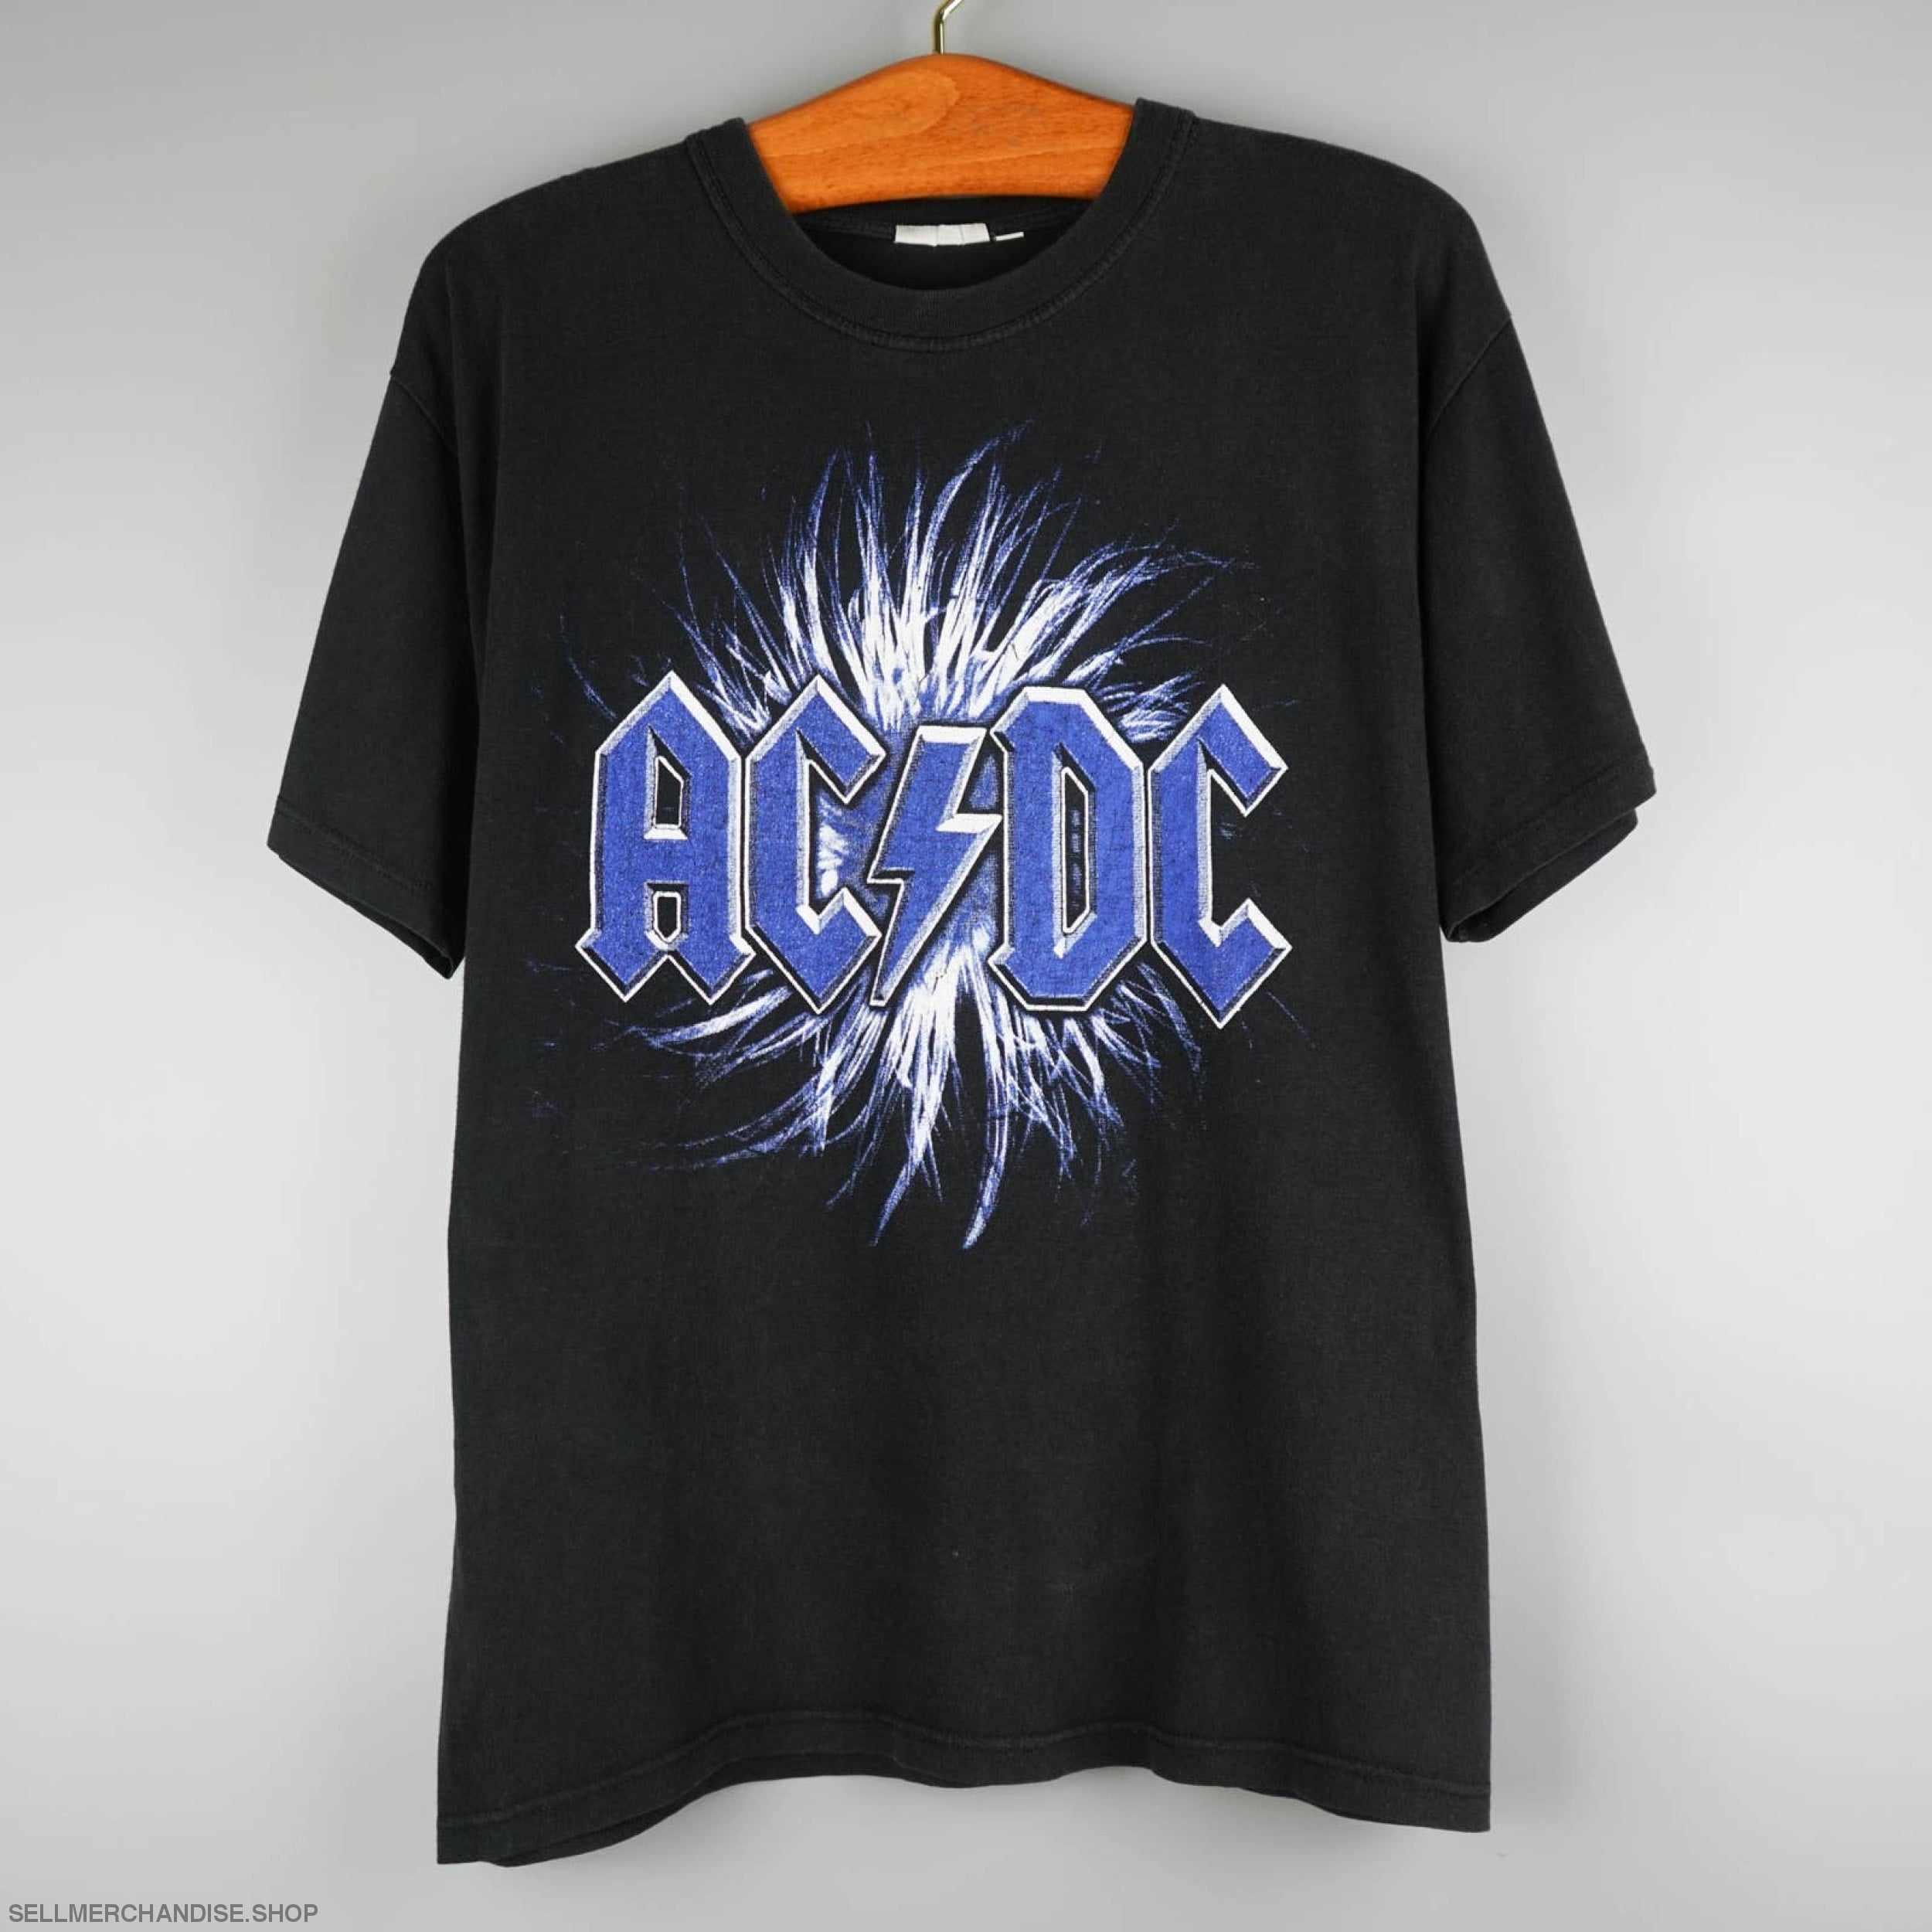 Vintage ACDC T-Shirts Collection | SellMerchandise.Shop